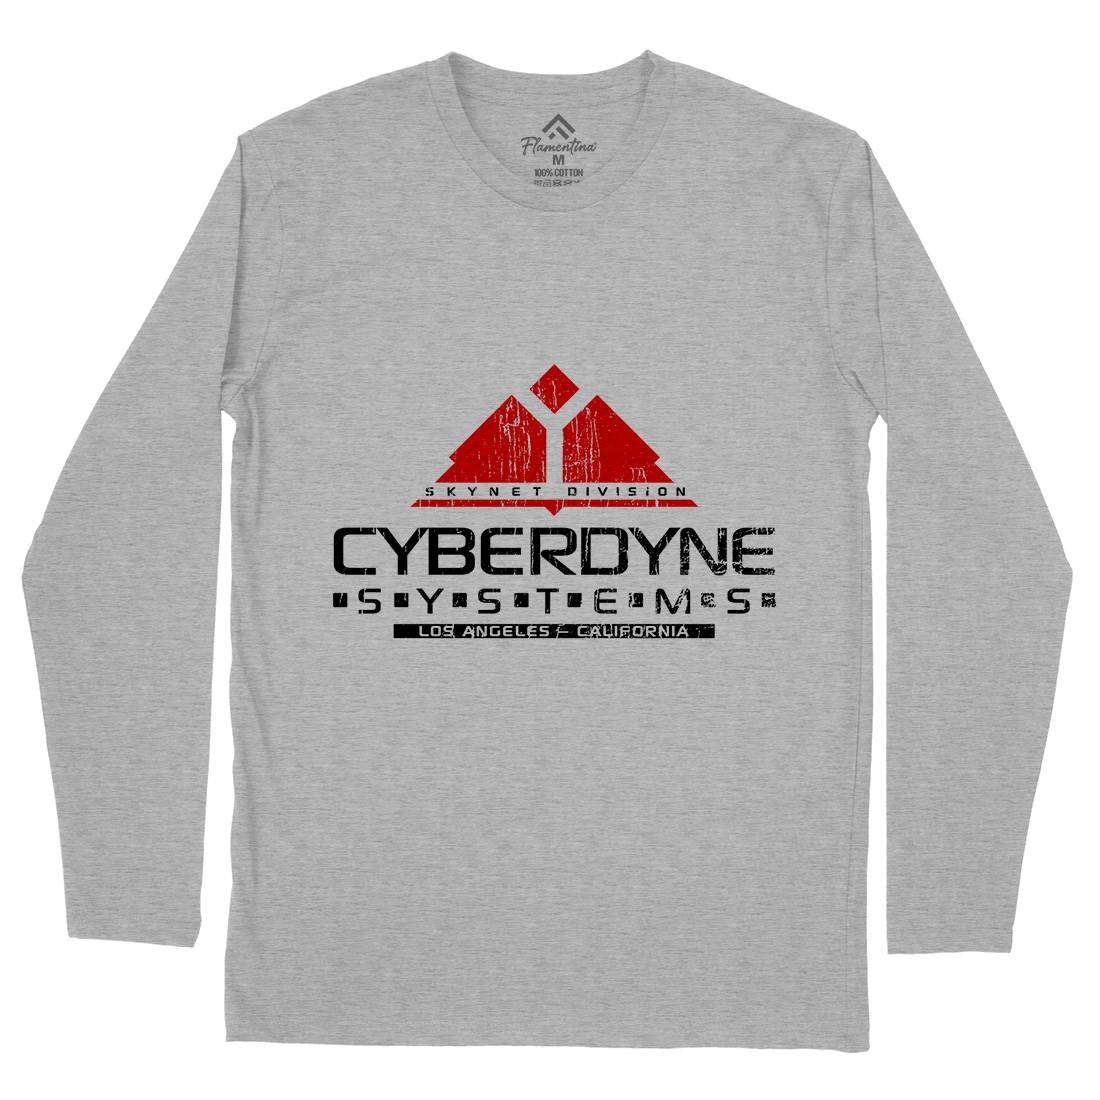 Cyberdyne Systems Mens Long Sleeve T-Shirt Space D122